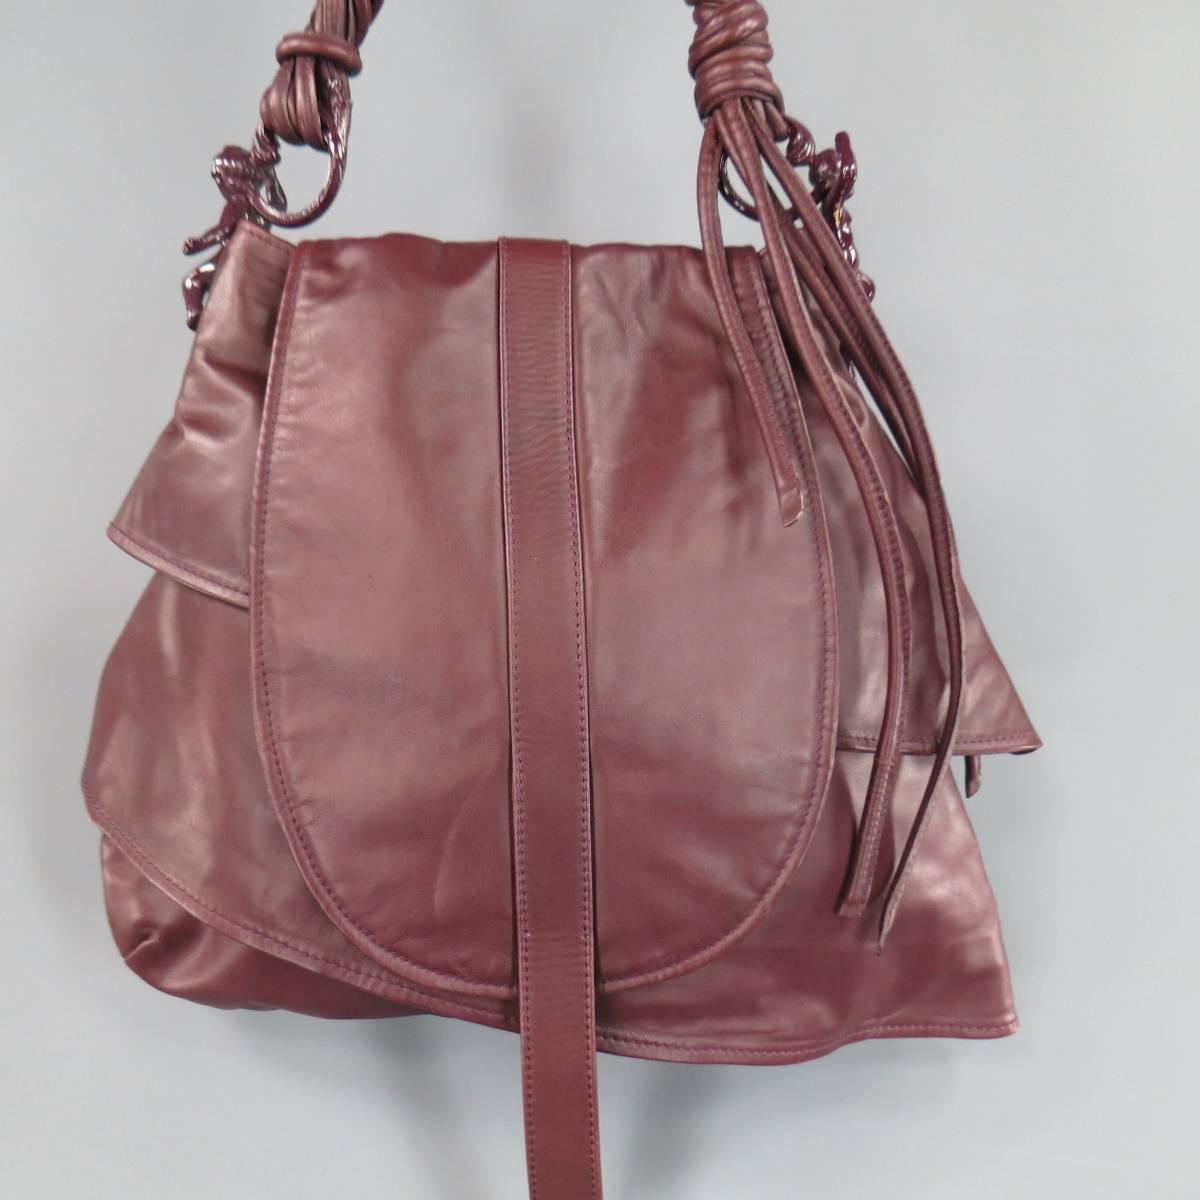 This fabulous ARNOLDO BATTOIS 2011-12 collection shoulder bag comes in a plum burgundy smooth leather and features a wrapped leather shoulder strap with fringe, enamel cherub hardware, layered body, and flap with extended strap. Made in